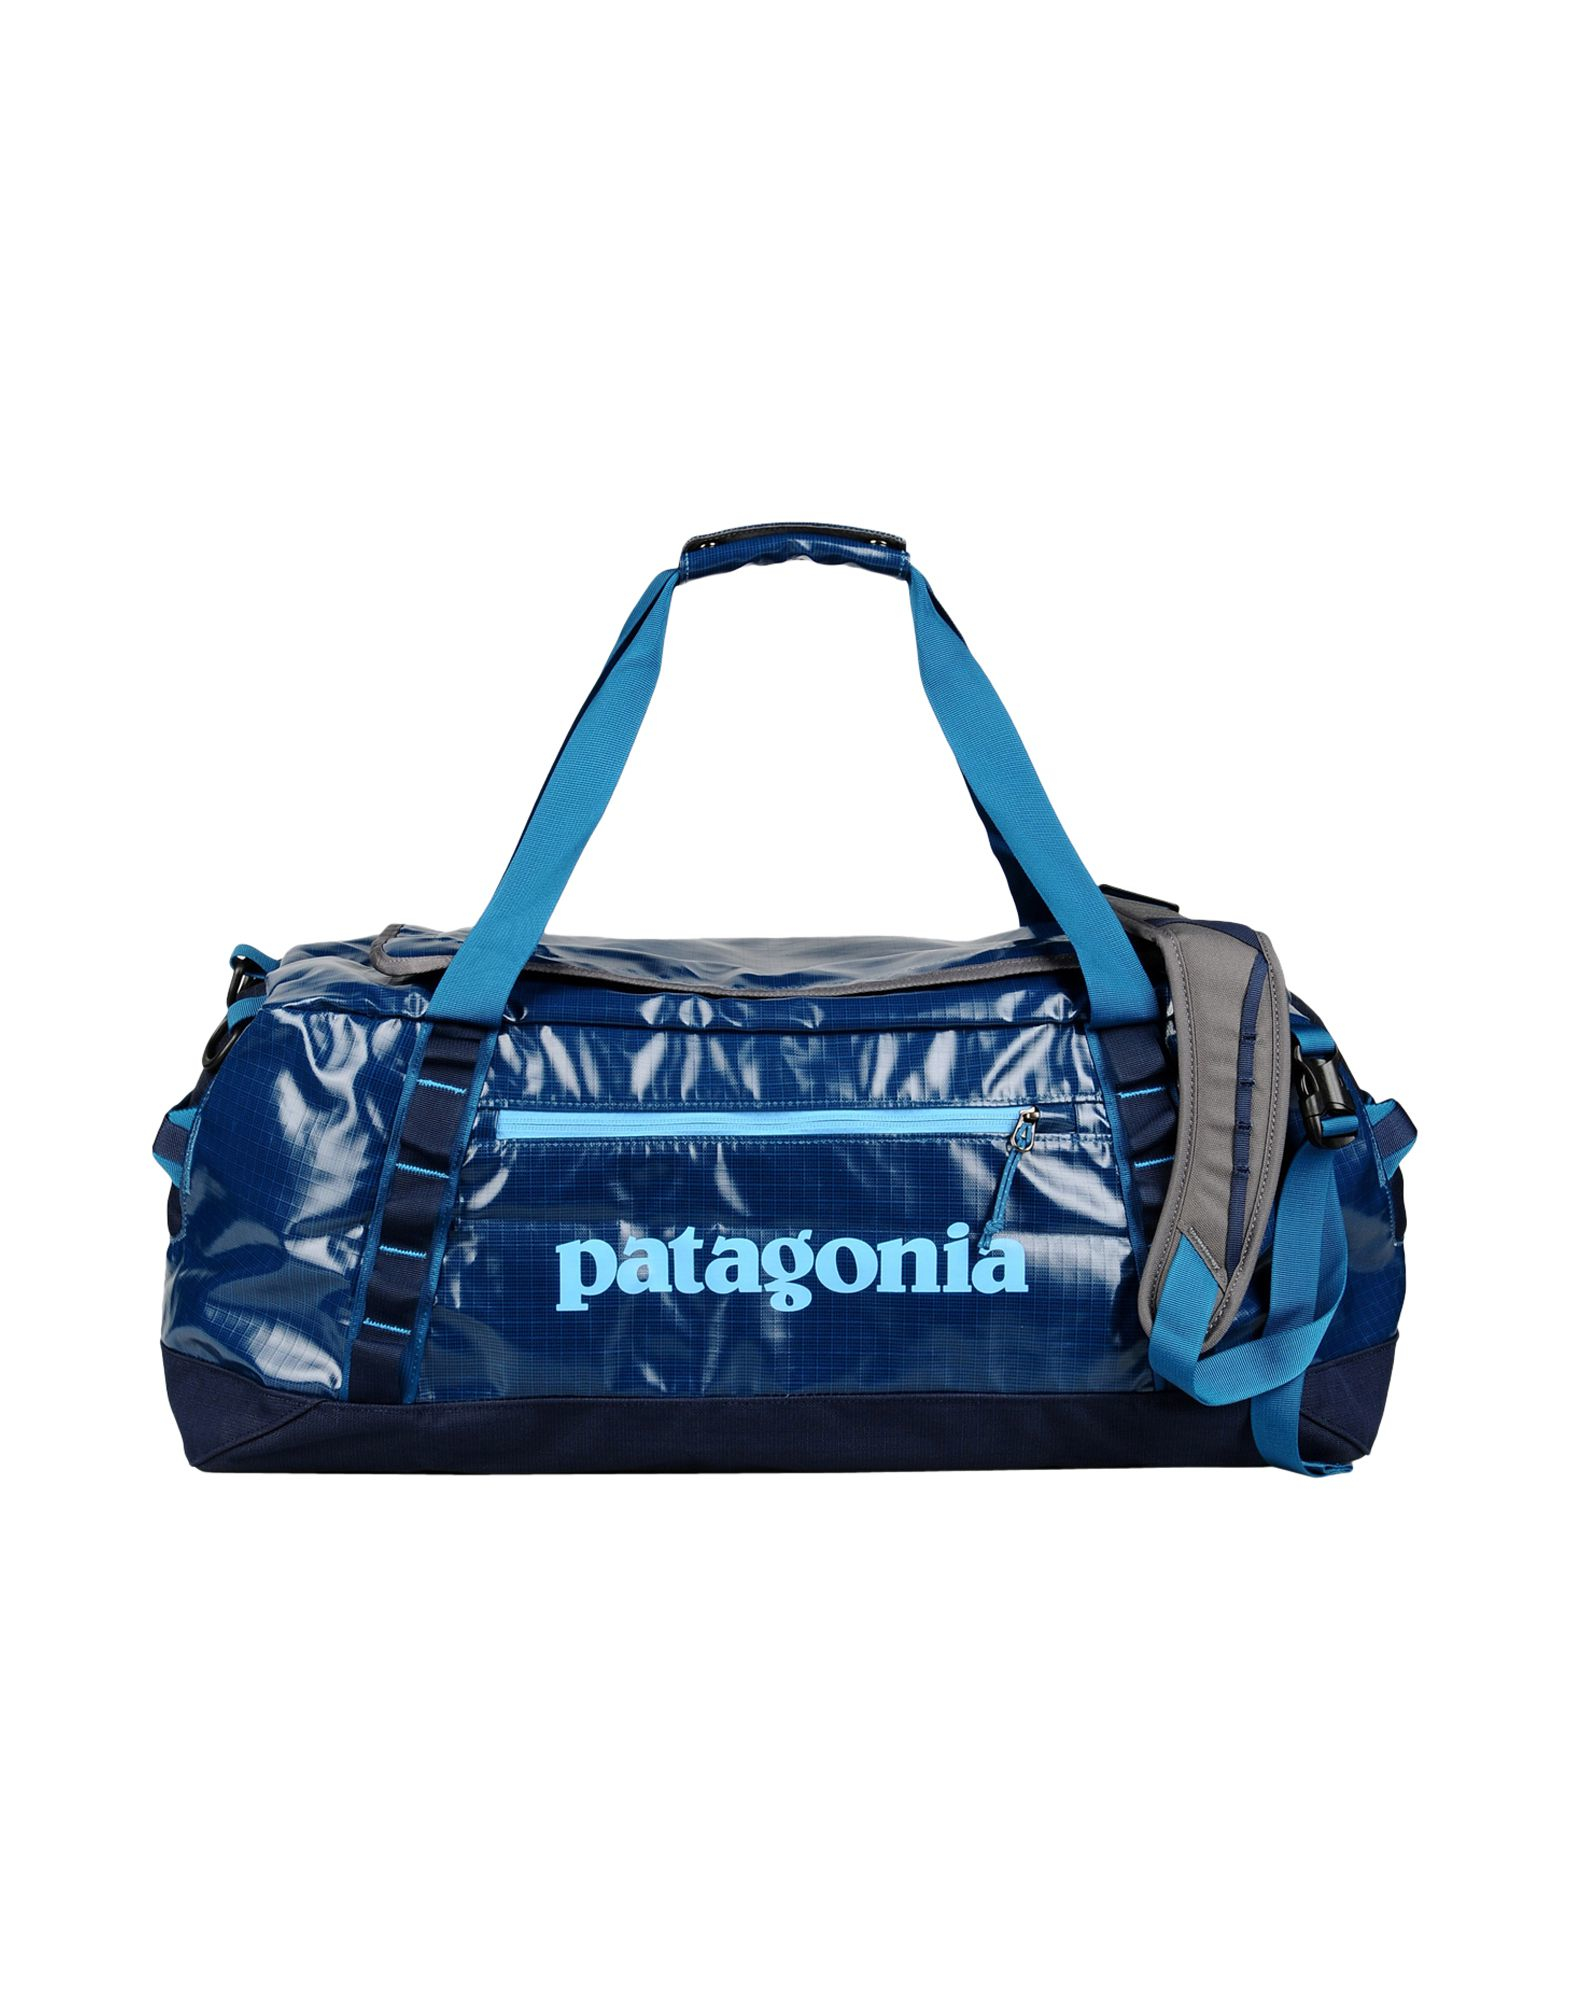 Lyst - Patagonia Luggage in Blue